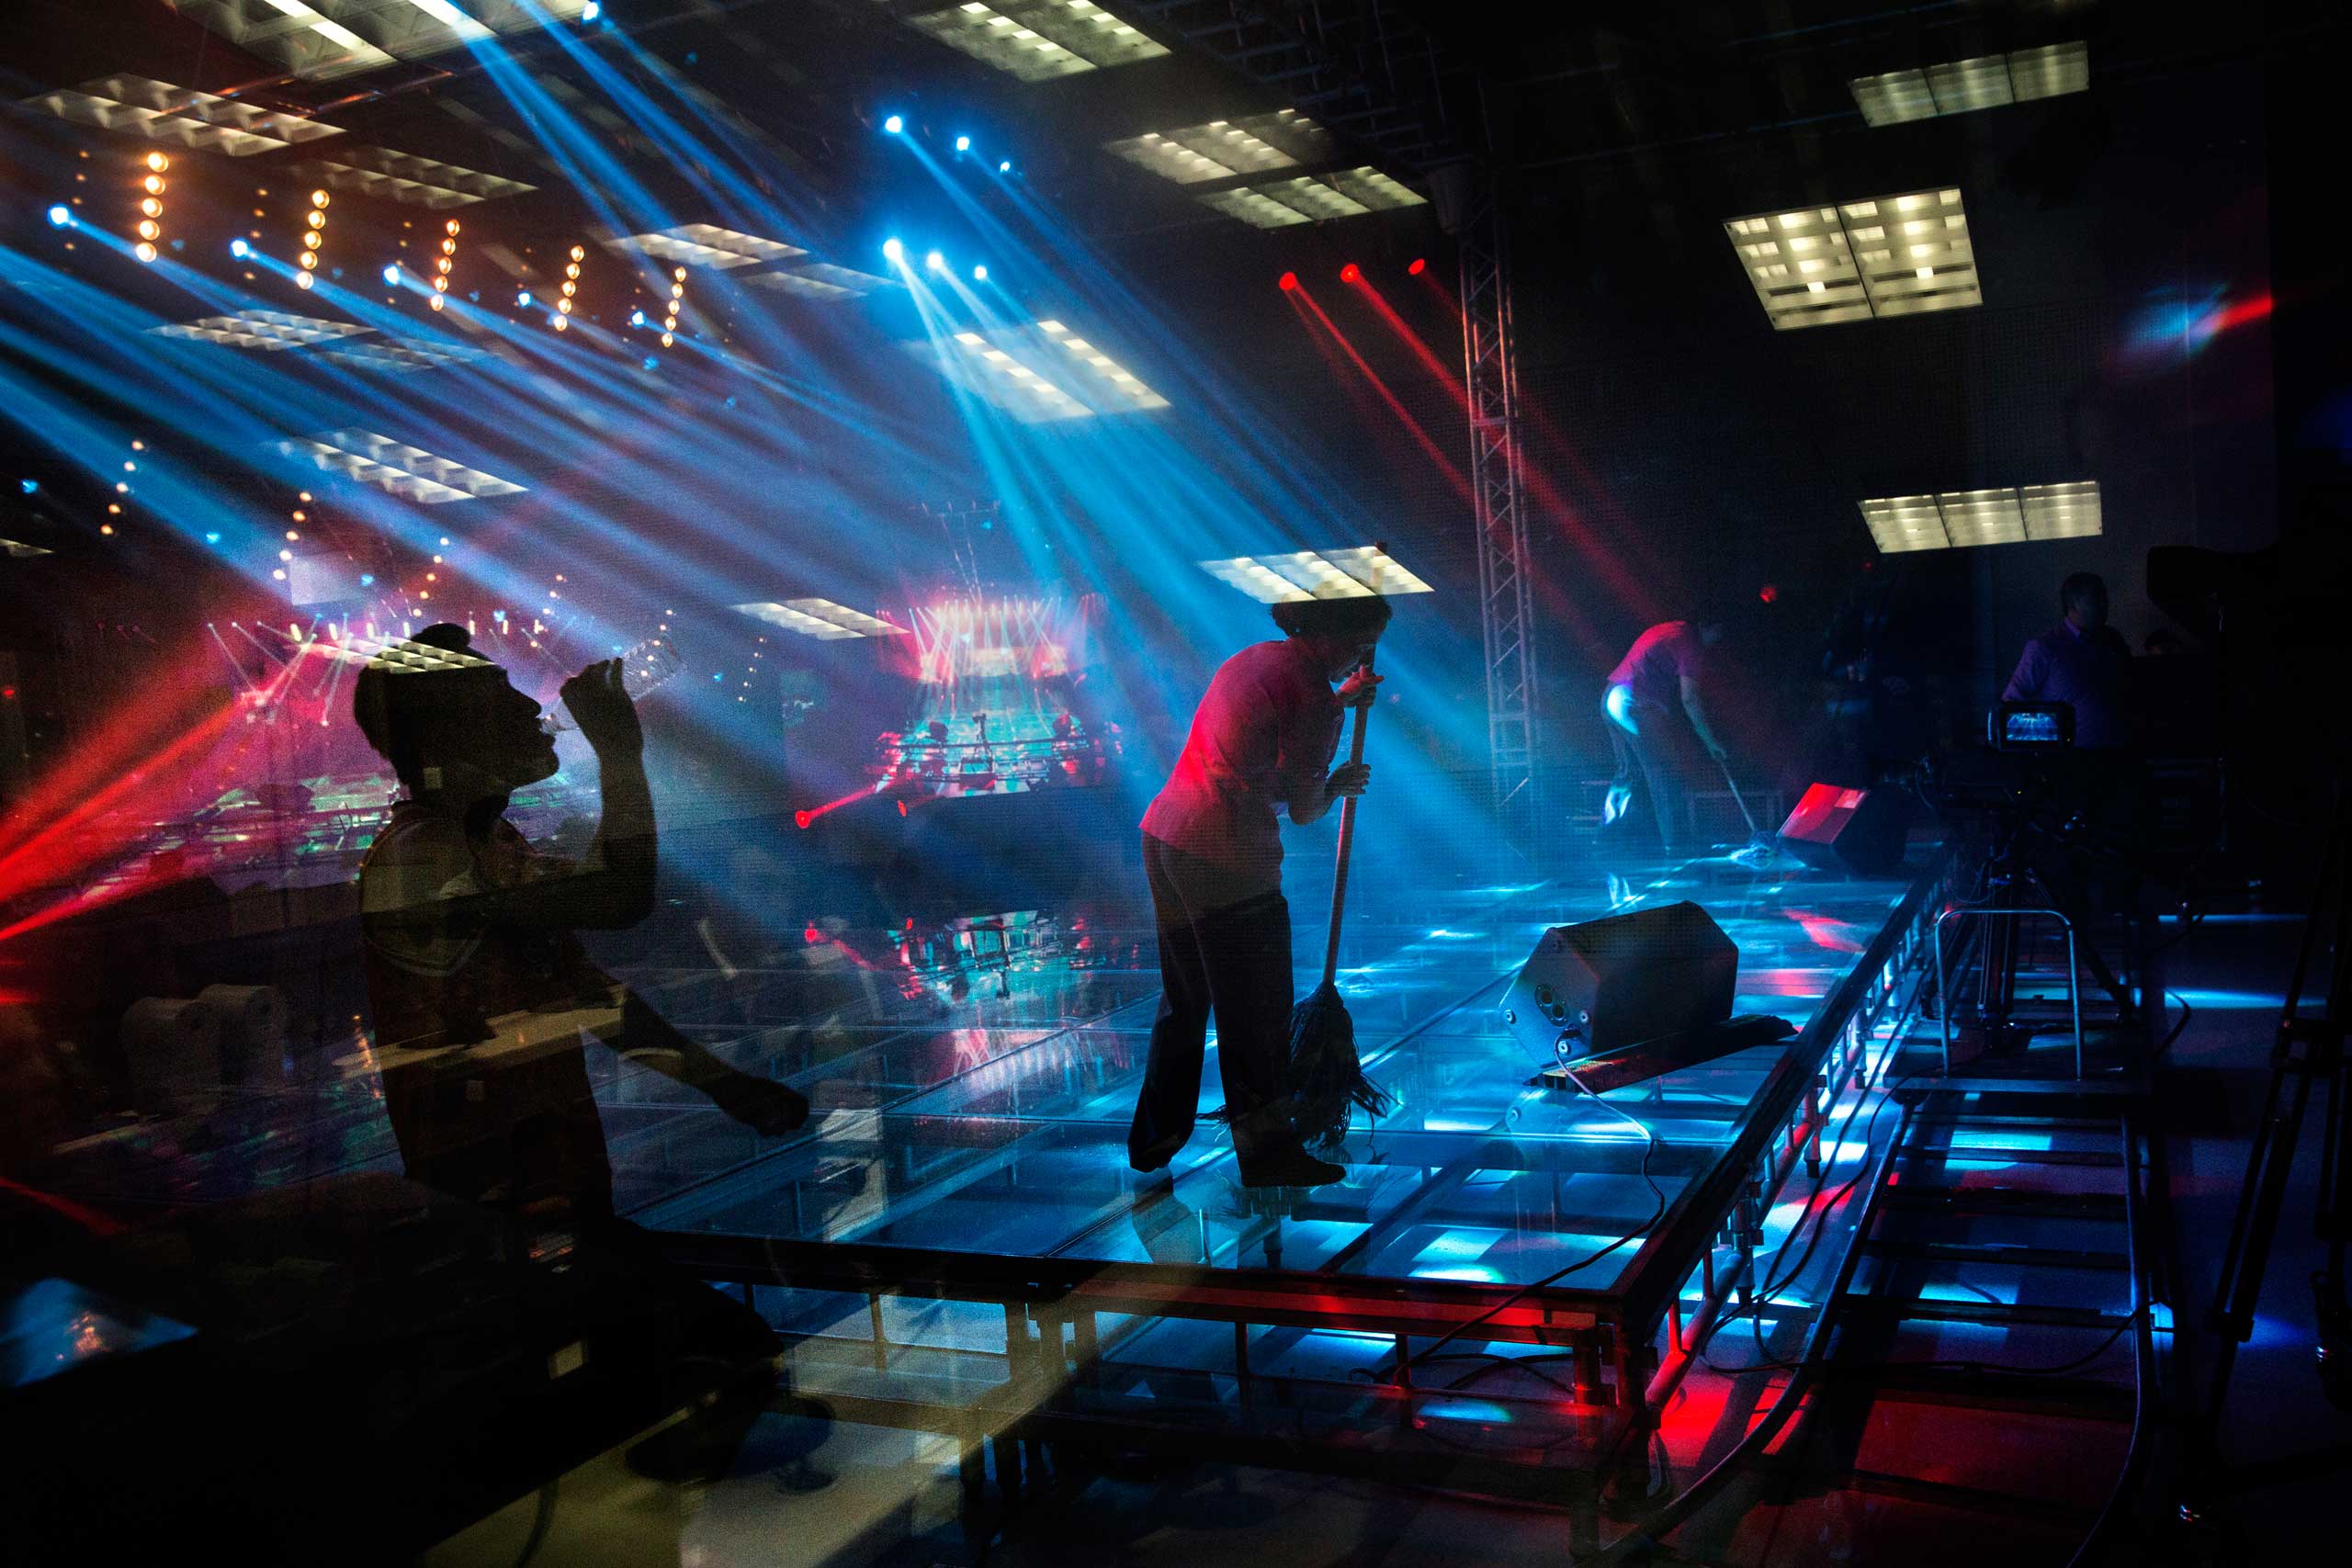 The crew of Uighur pop sensation Ablajan clean the stage during rehearsals for a planned live webcast concert scheduled for that afternoon in Urumqi, China, on July 31, 2014